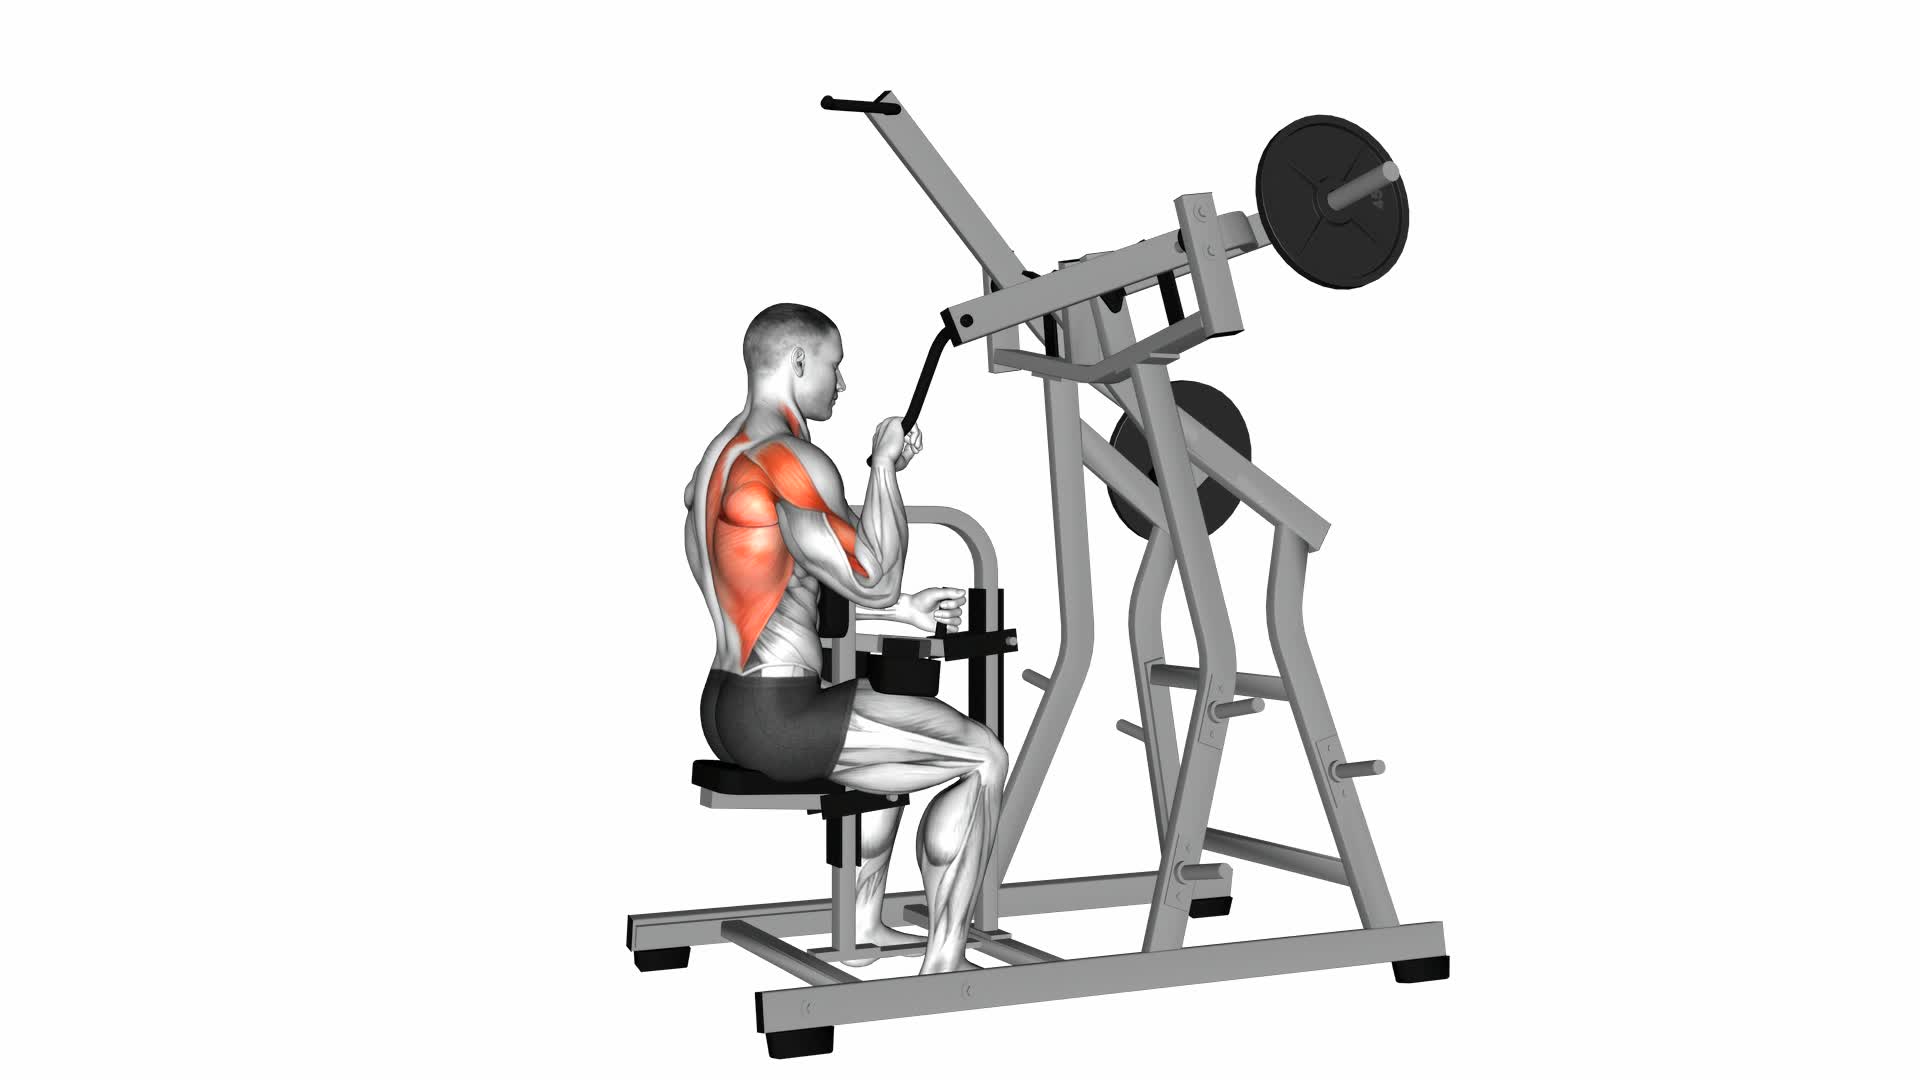 Lever One Arm Lateral Wide Pulldown (Plate Loaded) - Video Exercise Guide & Tips